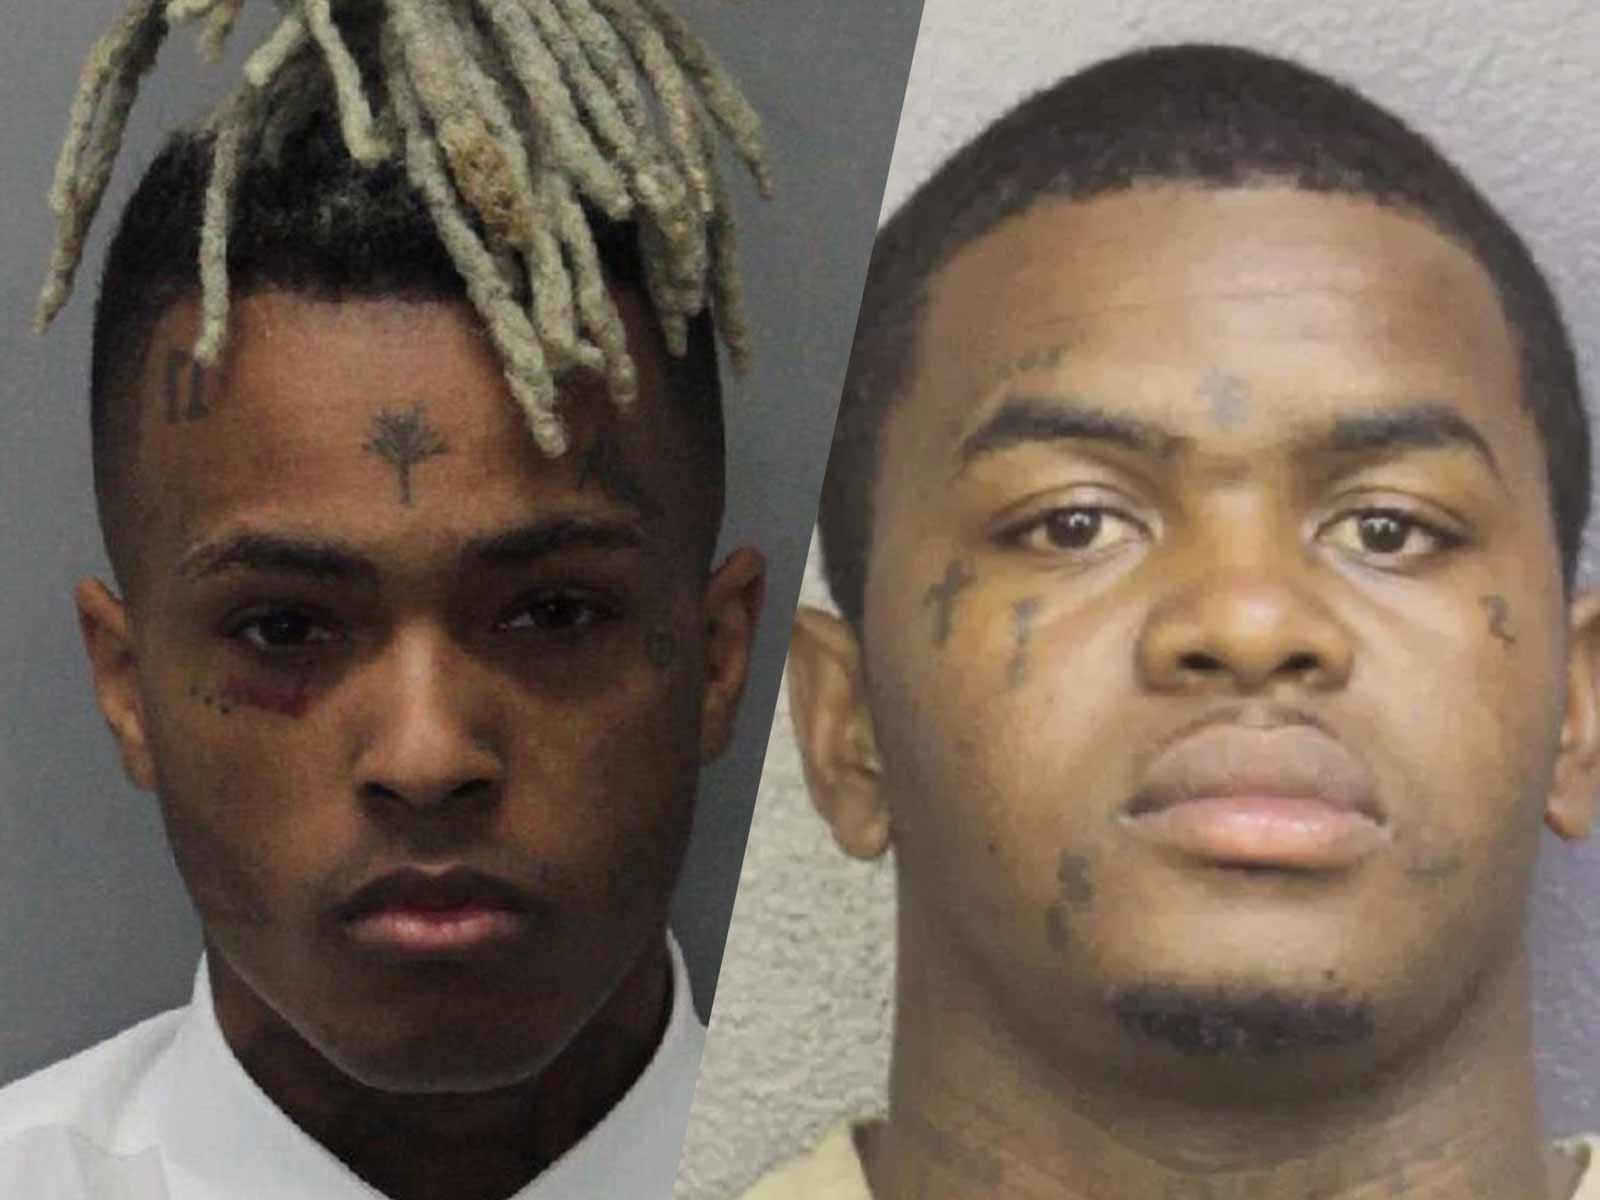 XXXTentacion Murder Suspect Wants $10,000 to Conduct His Own Private Investigation